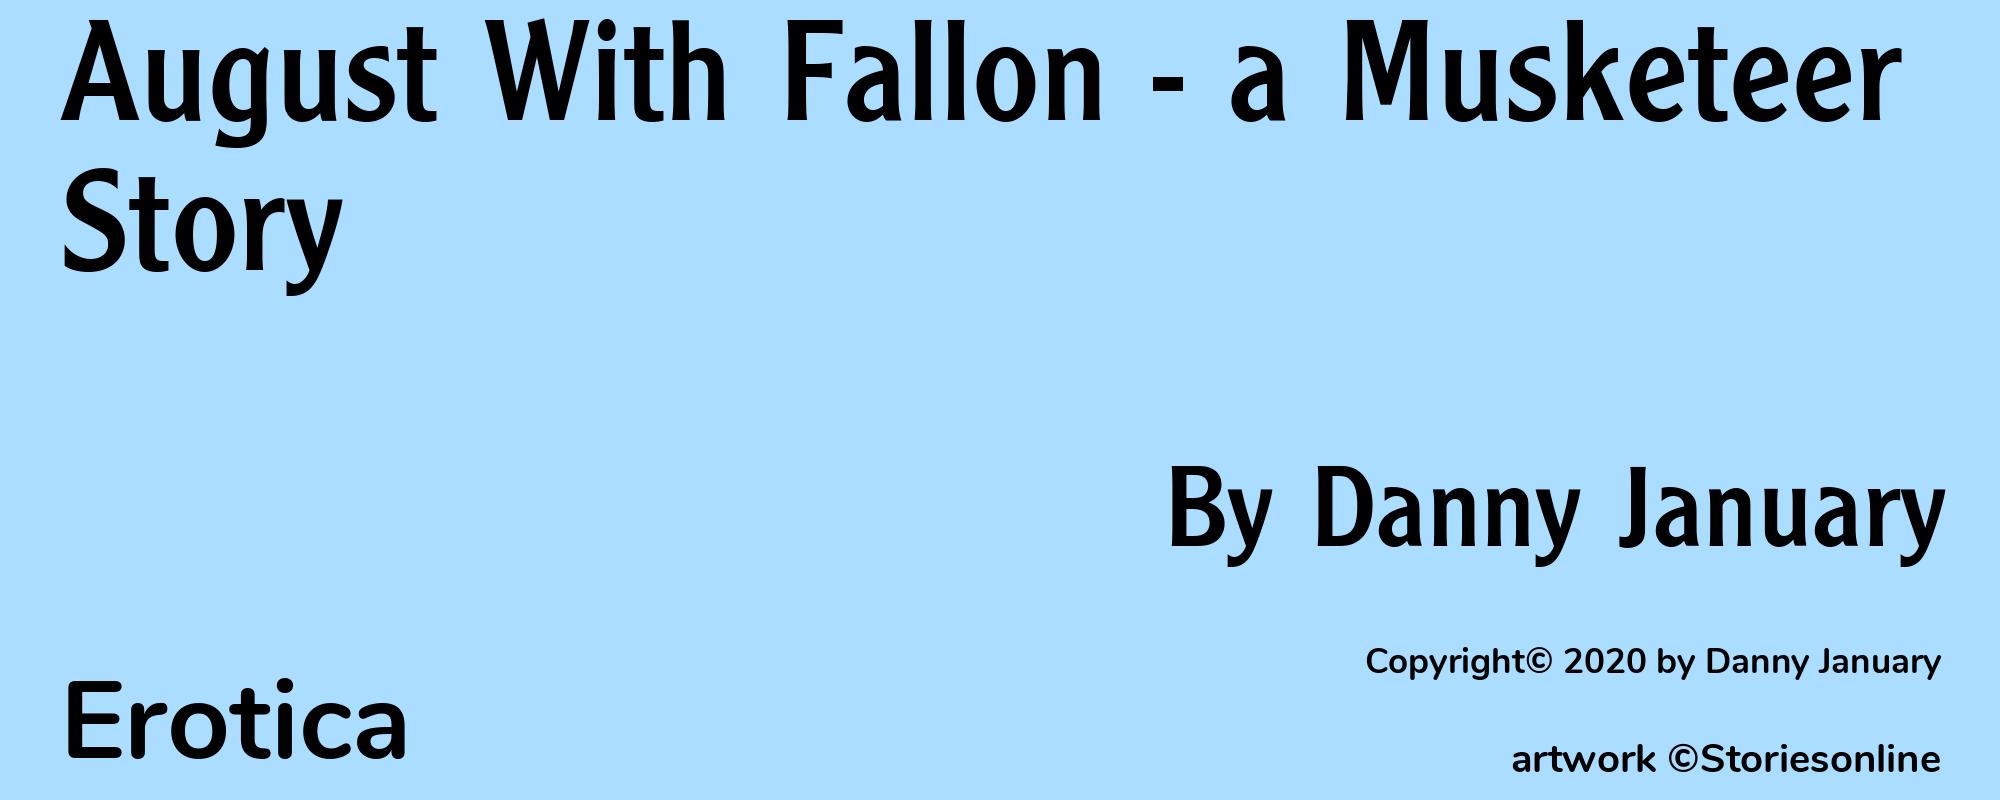 August With Fallon - a Musketeer Story - Cover